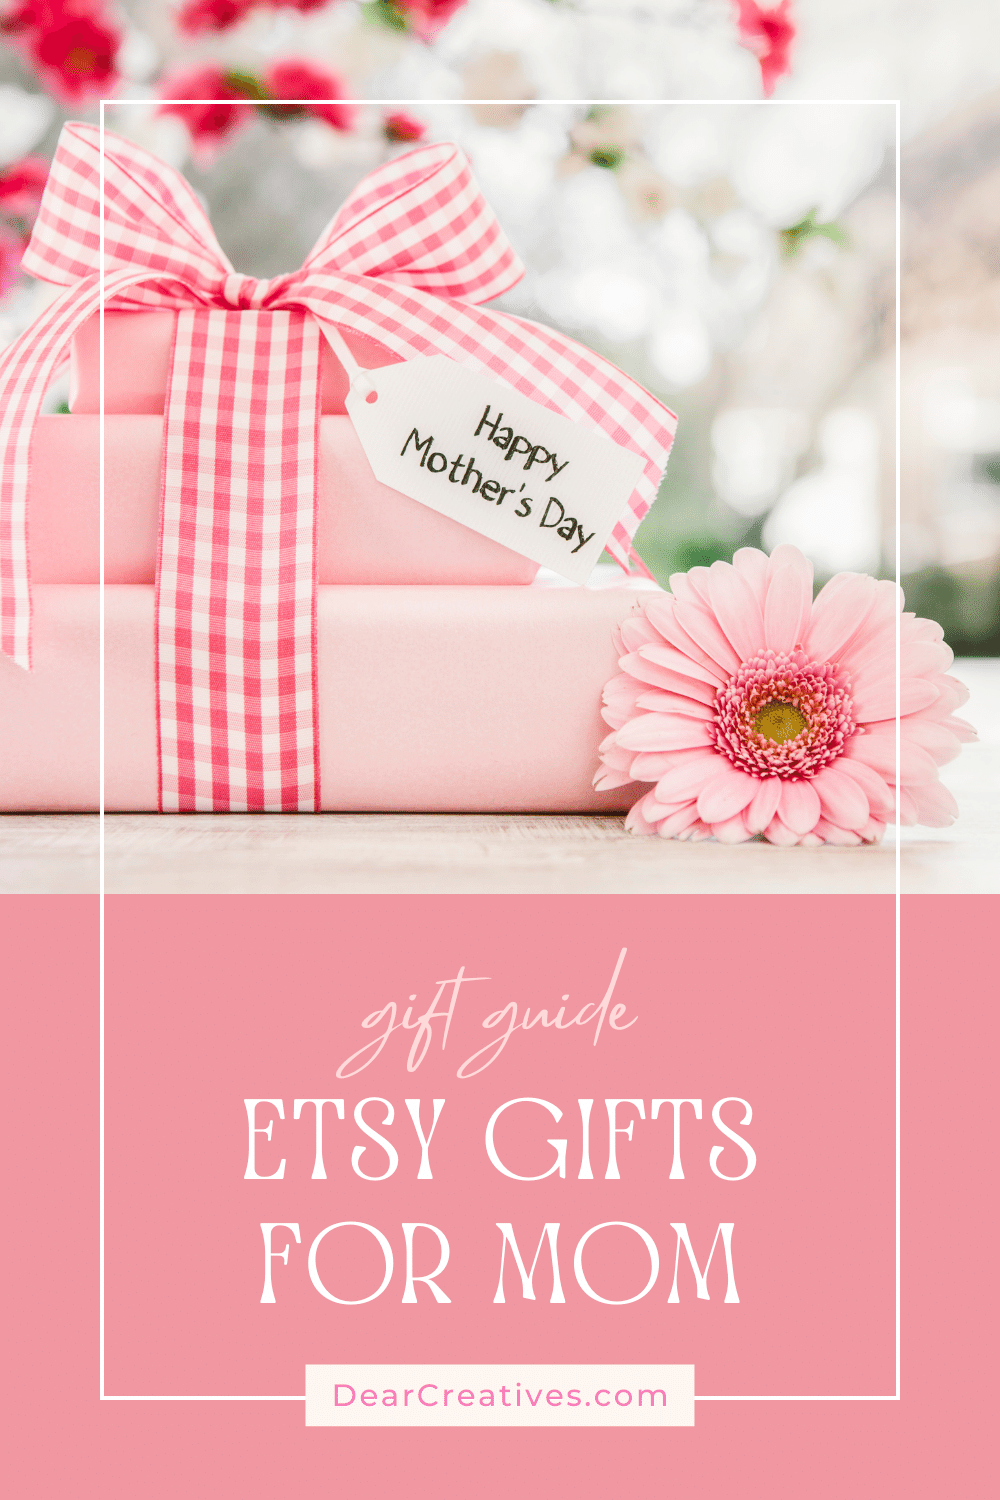 Etsy Gifts For Mom - Make her day special by gifting her pretty, unique, handmade, and useful gifts she didn't even know she wanted! See this gift list with over 50 ideas for what you can give her. DearCreatives.com